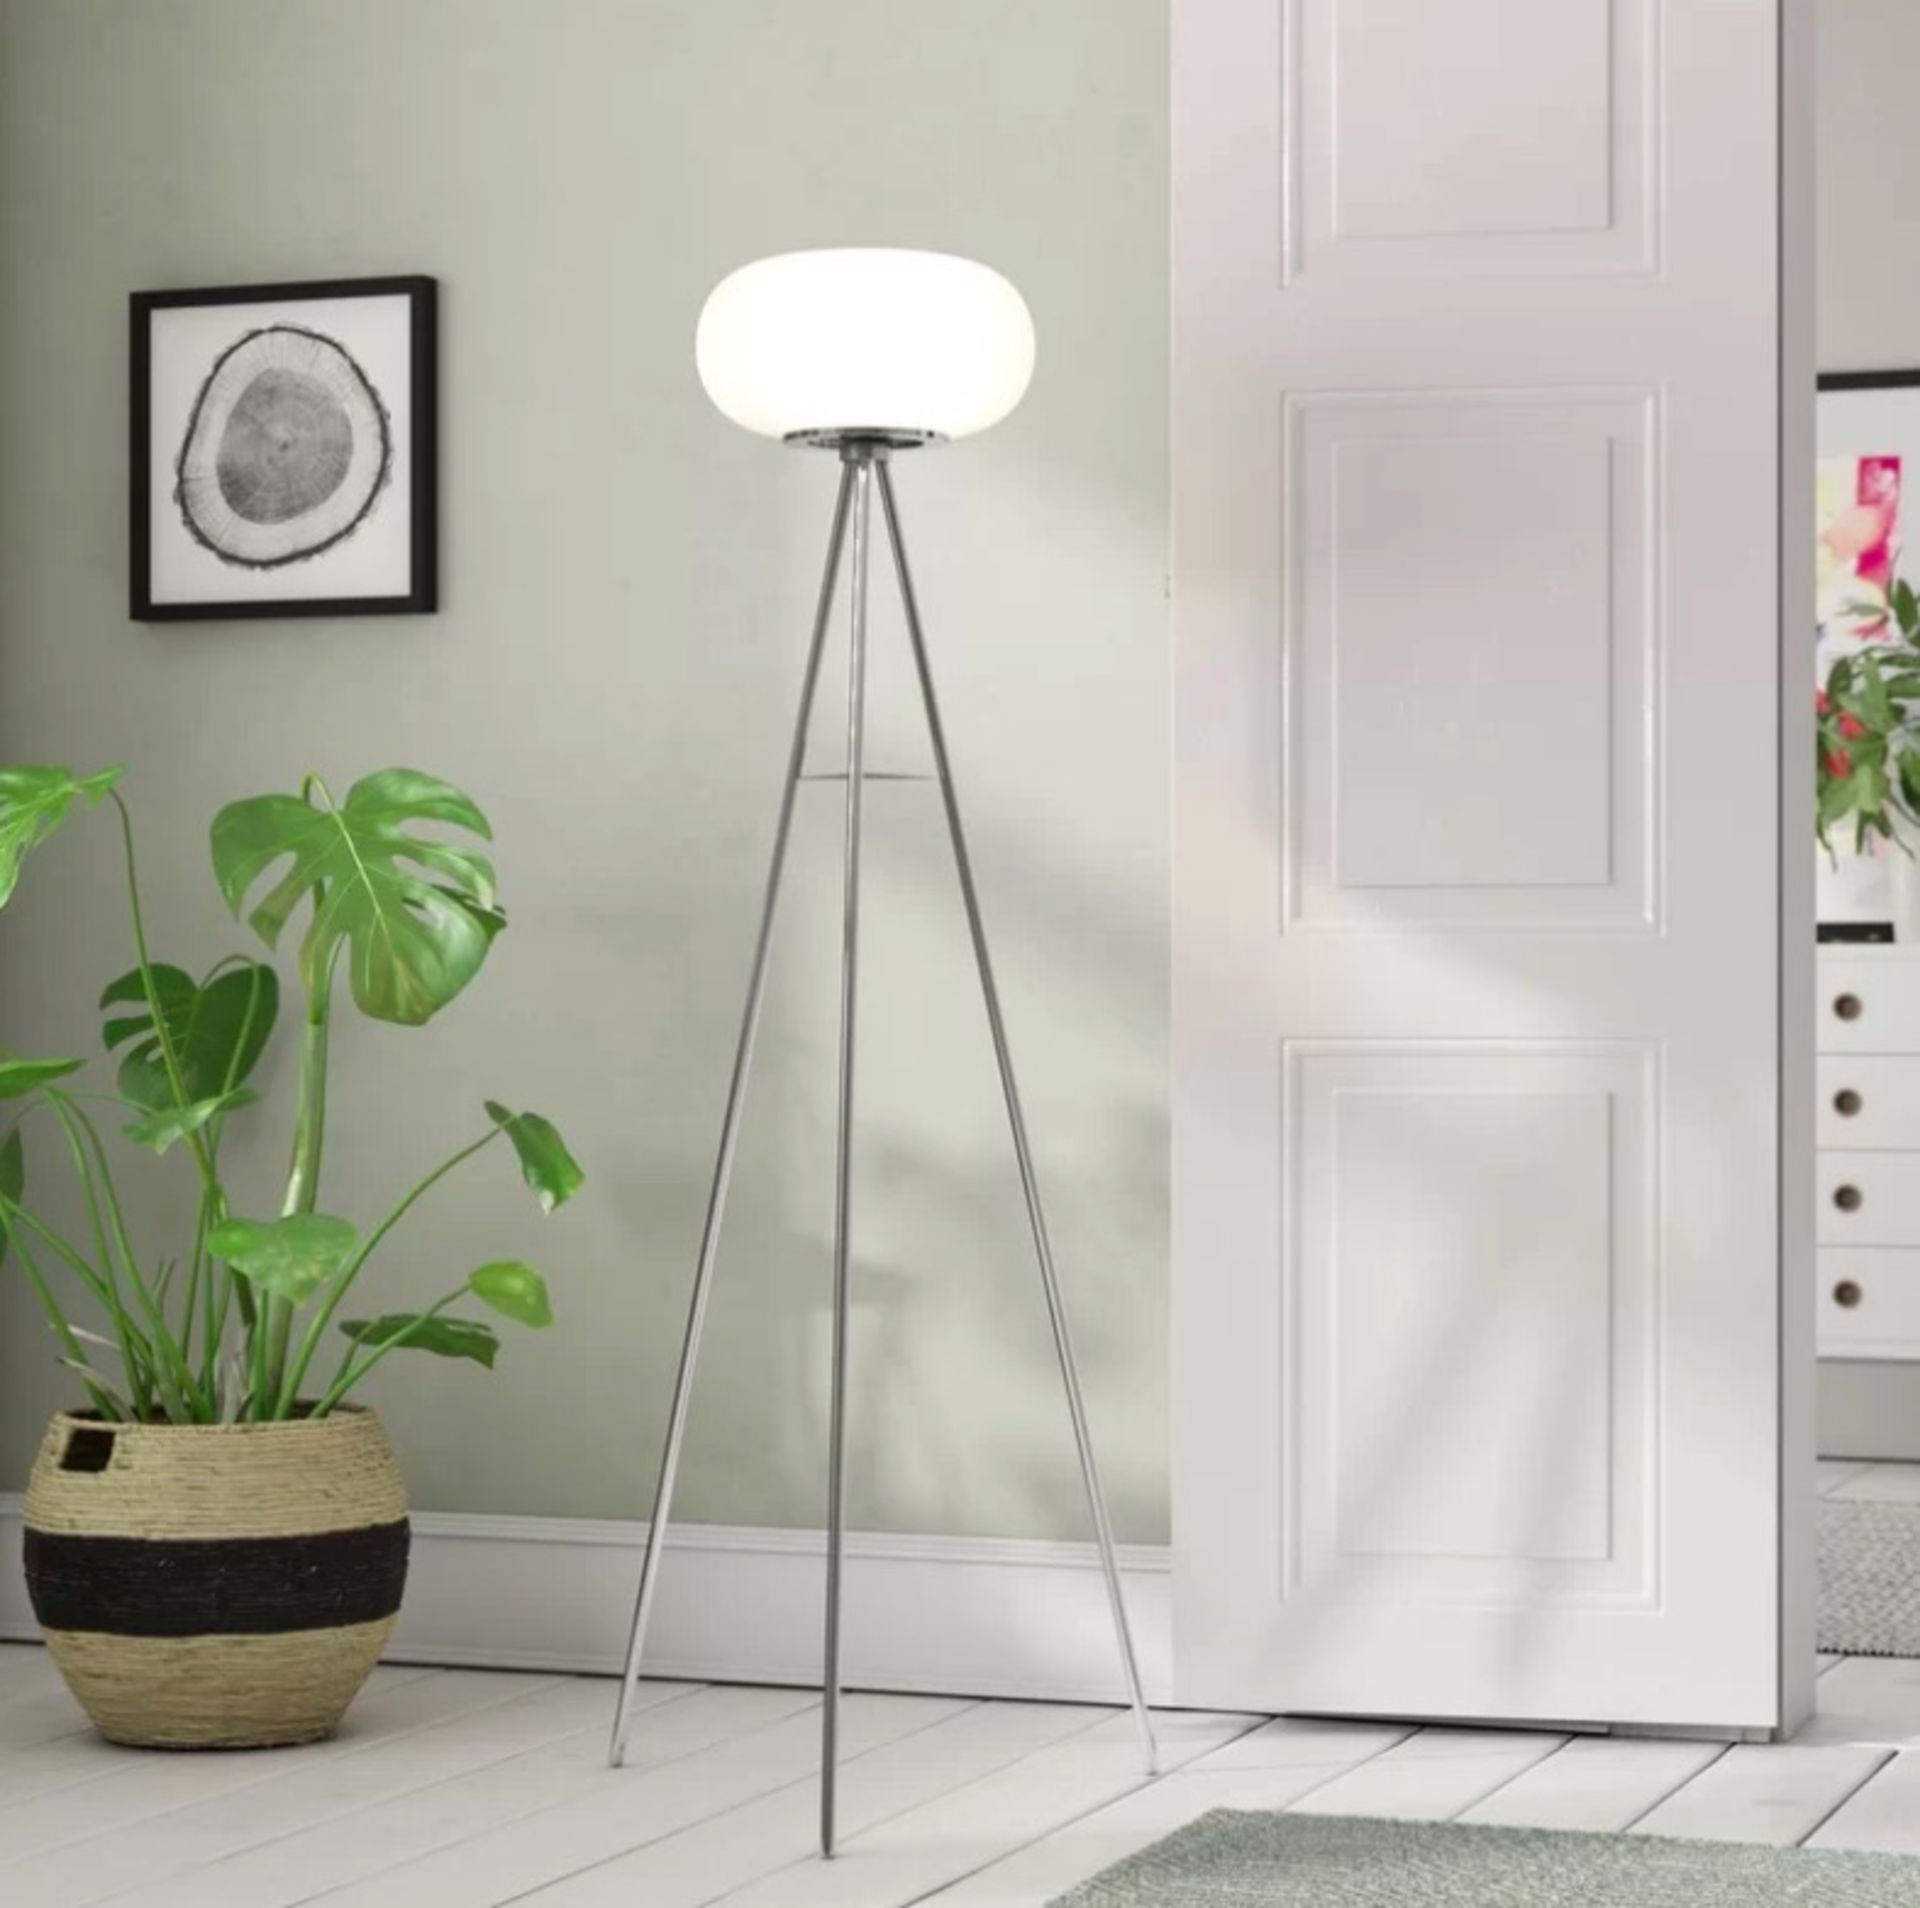 Opal 157cm Floor Lamp Tripod steel and opal glass floor lamp sought-after design at attainable price